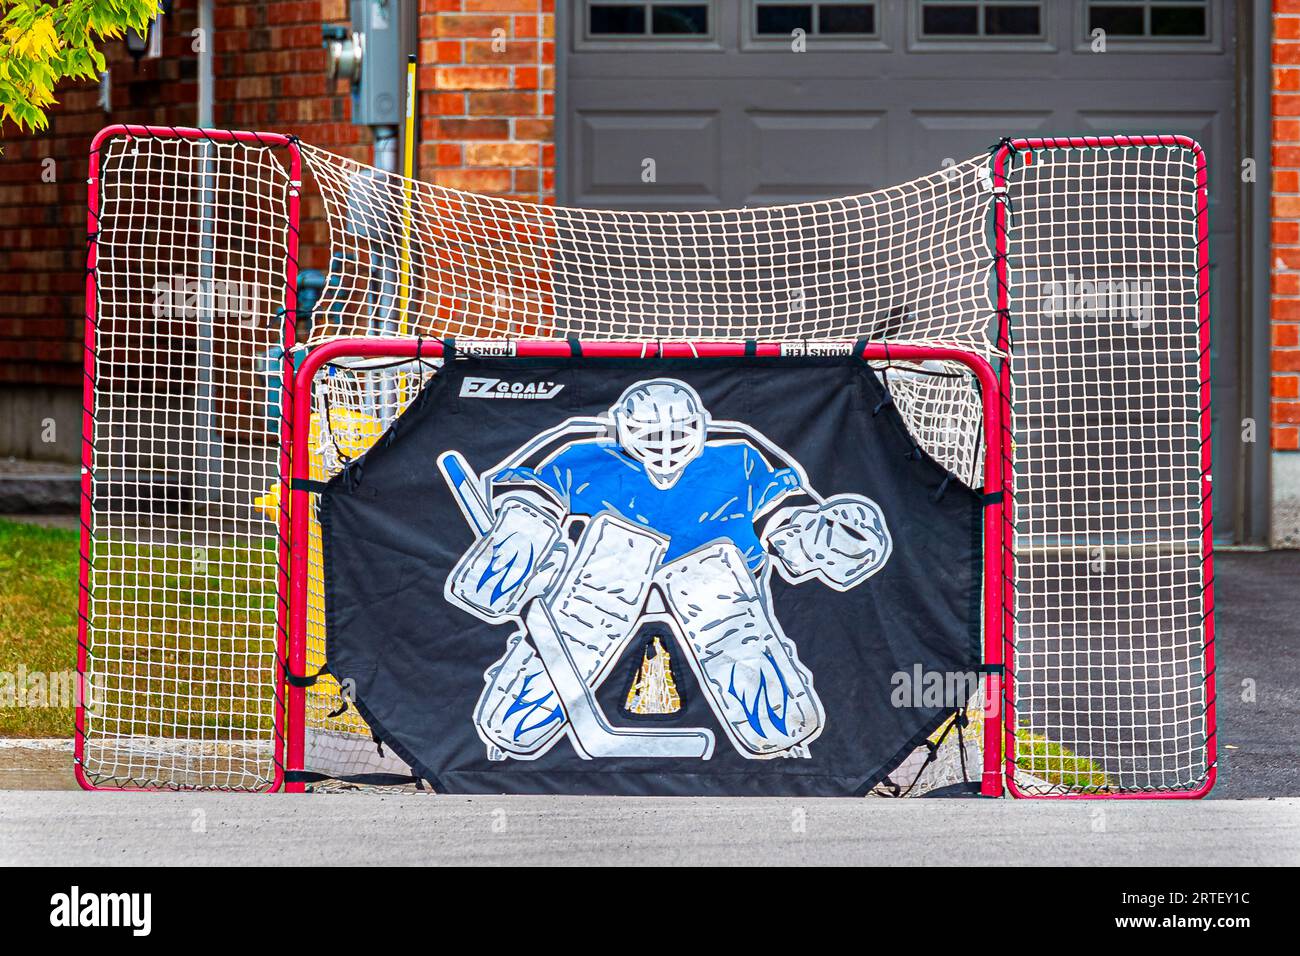 Hockey goal.Many neighbourhoods in Canadian cities, a common sight of playing hockey in the backyard. Hockey is a common image here.Canadian sport. Stock Photo